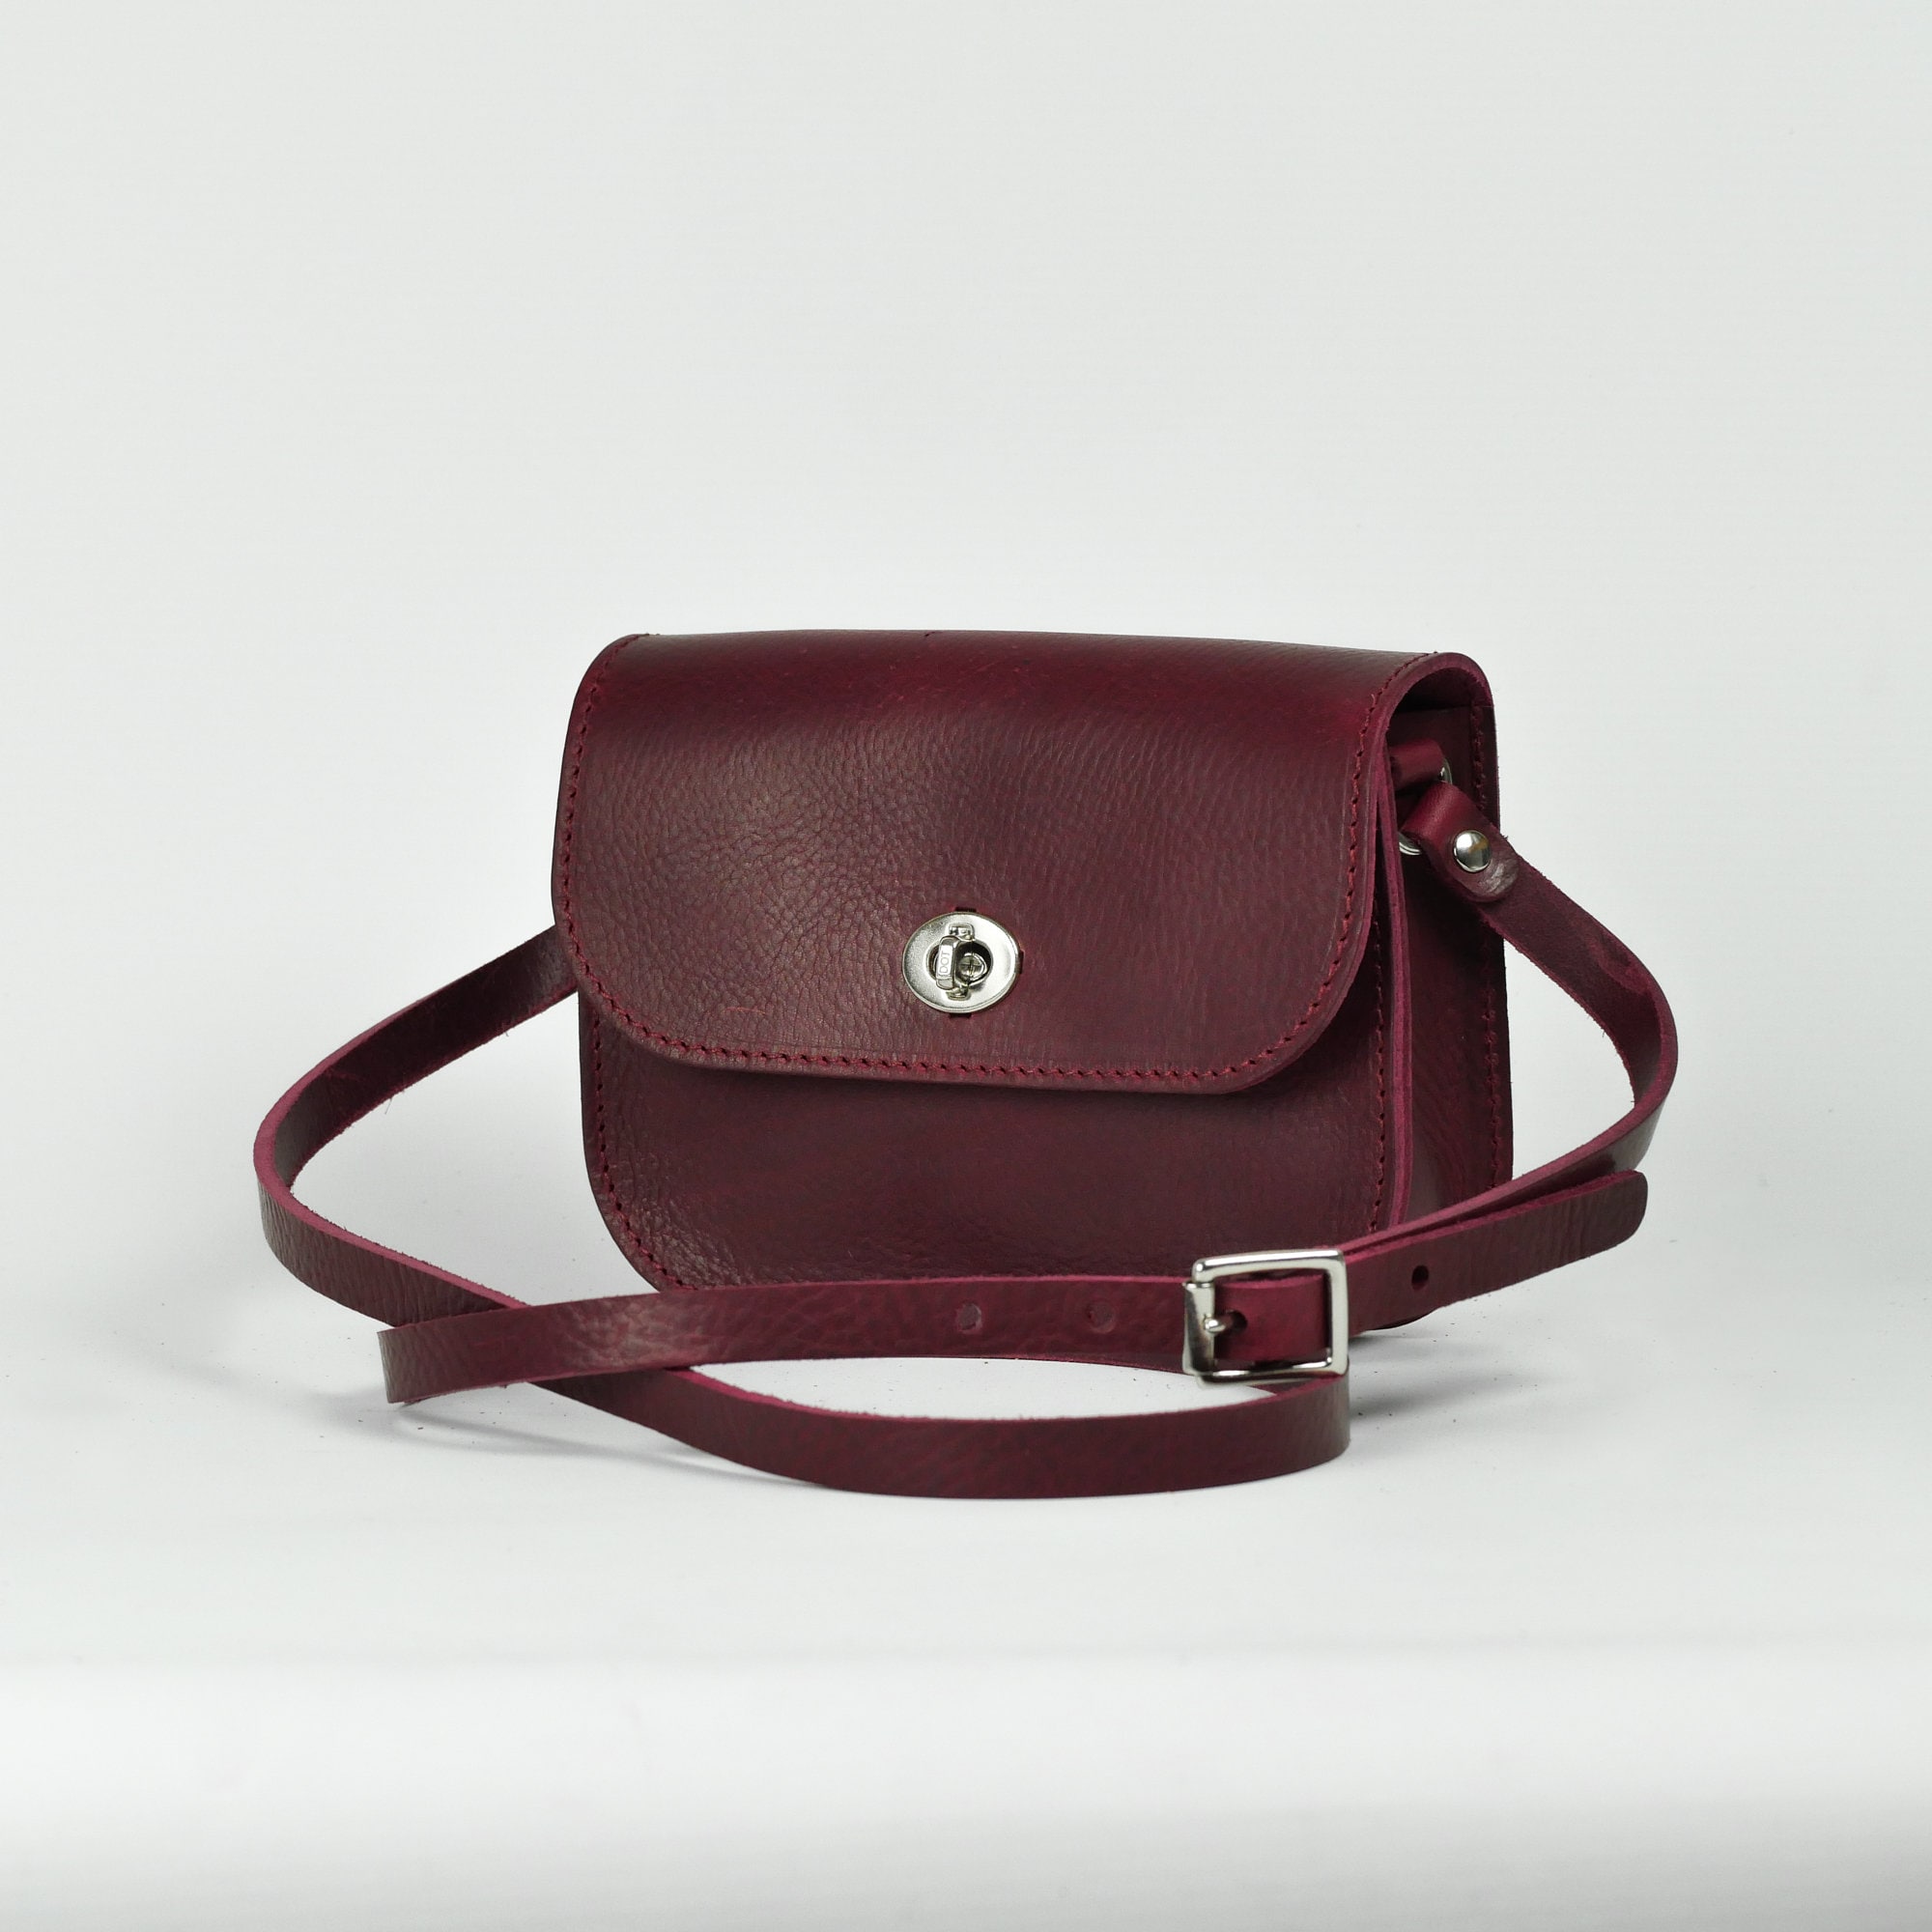 Buy Leather Cross Body Bag, Burgundy Leather Shoulder Bag, Women's Leather  Crossbody Bag, Leather Bag KF-4658 Online in India - Etsy